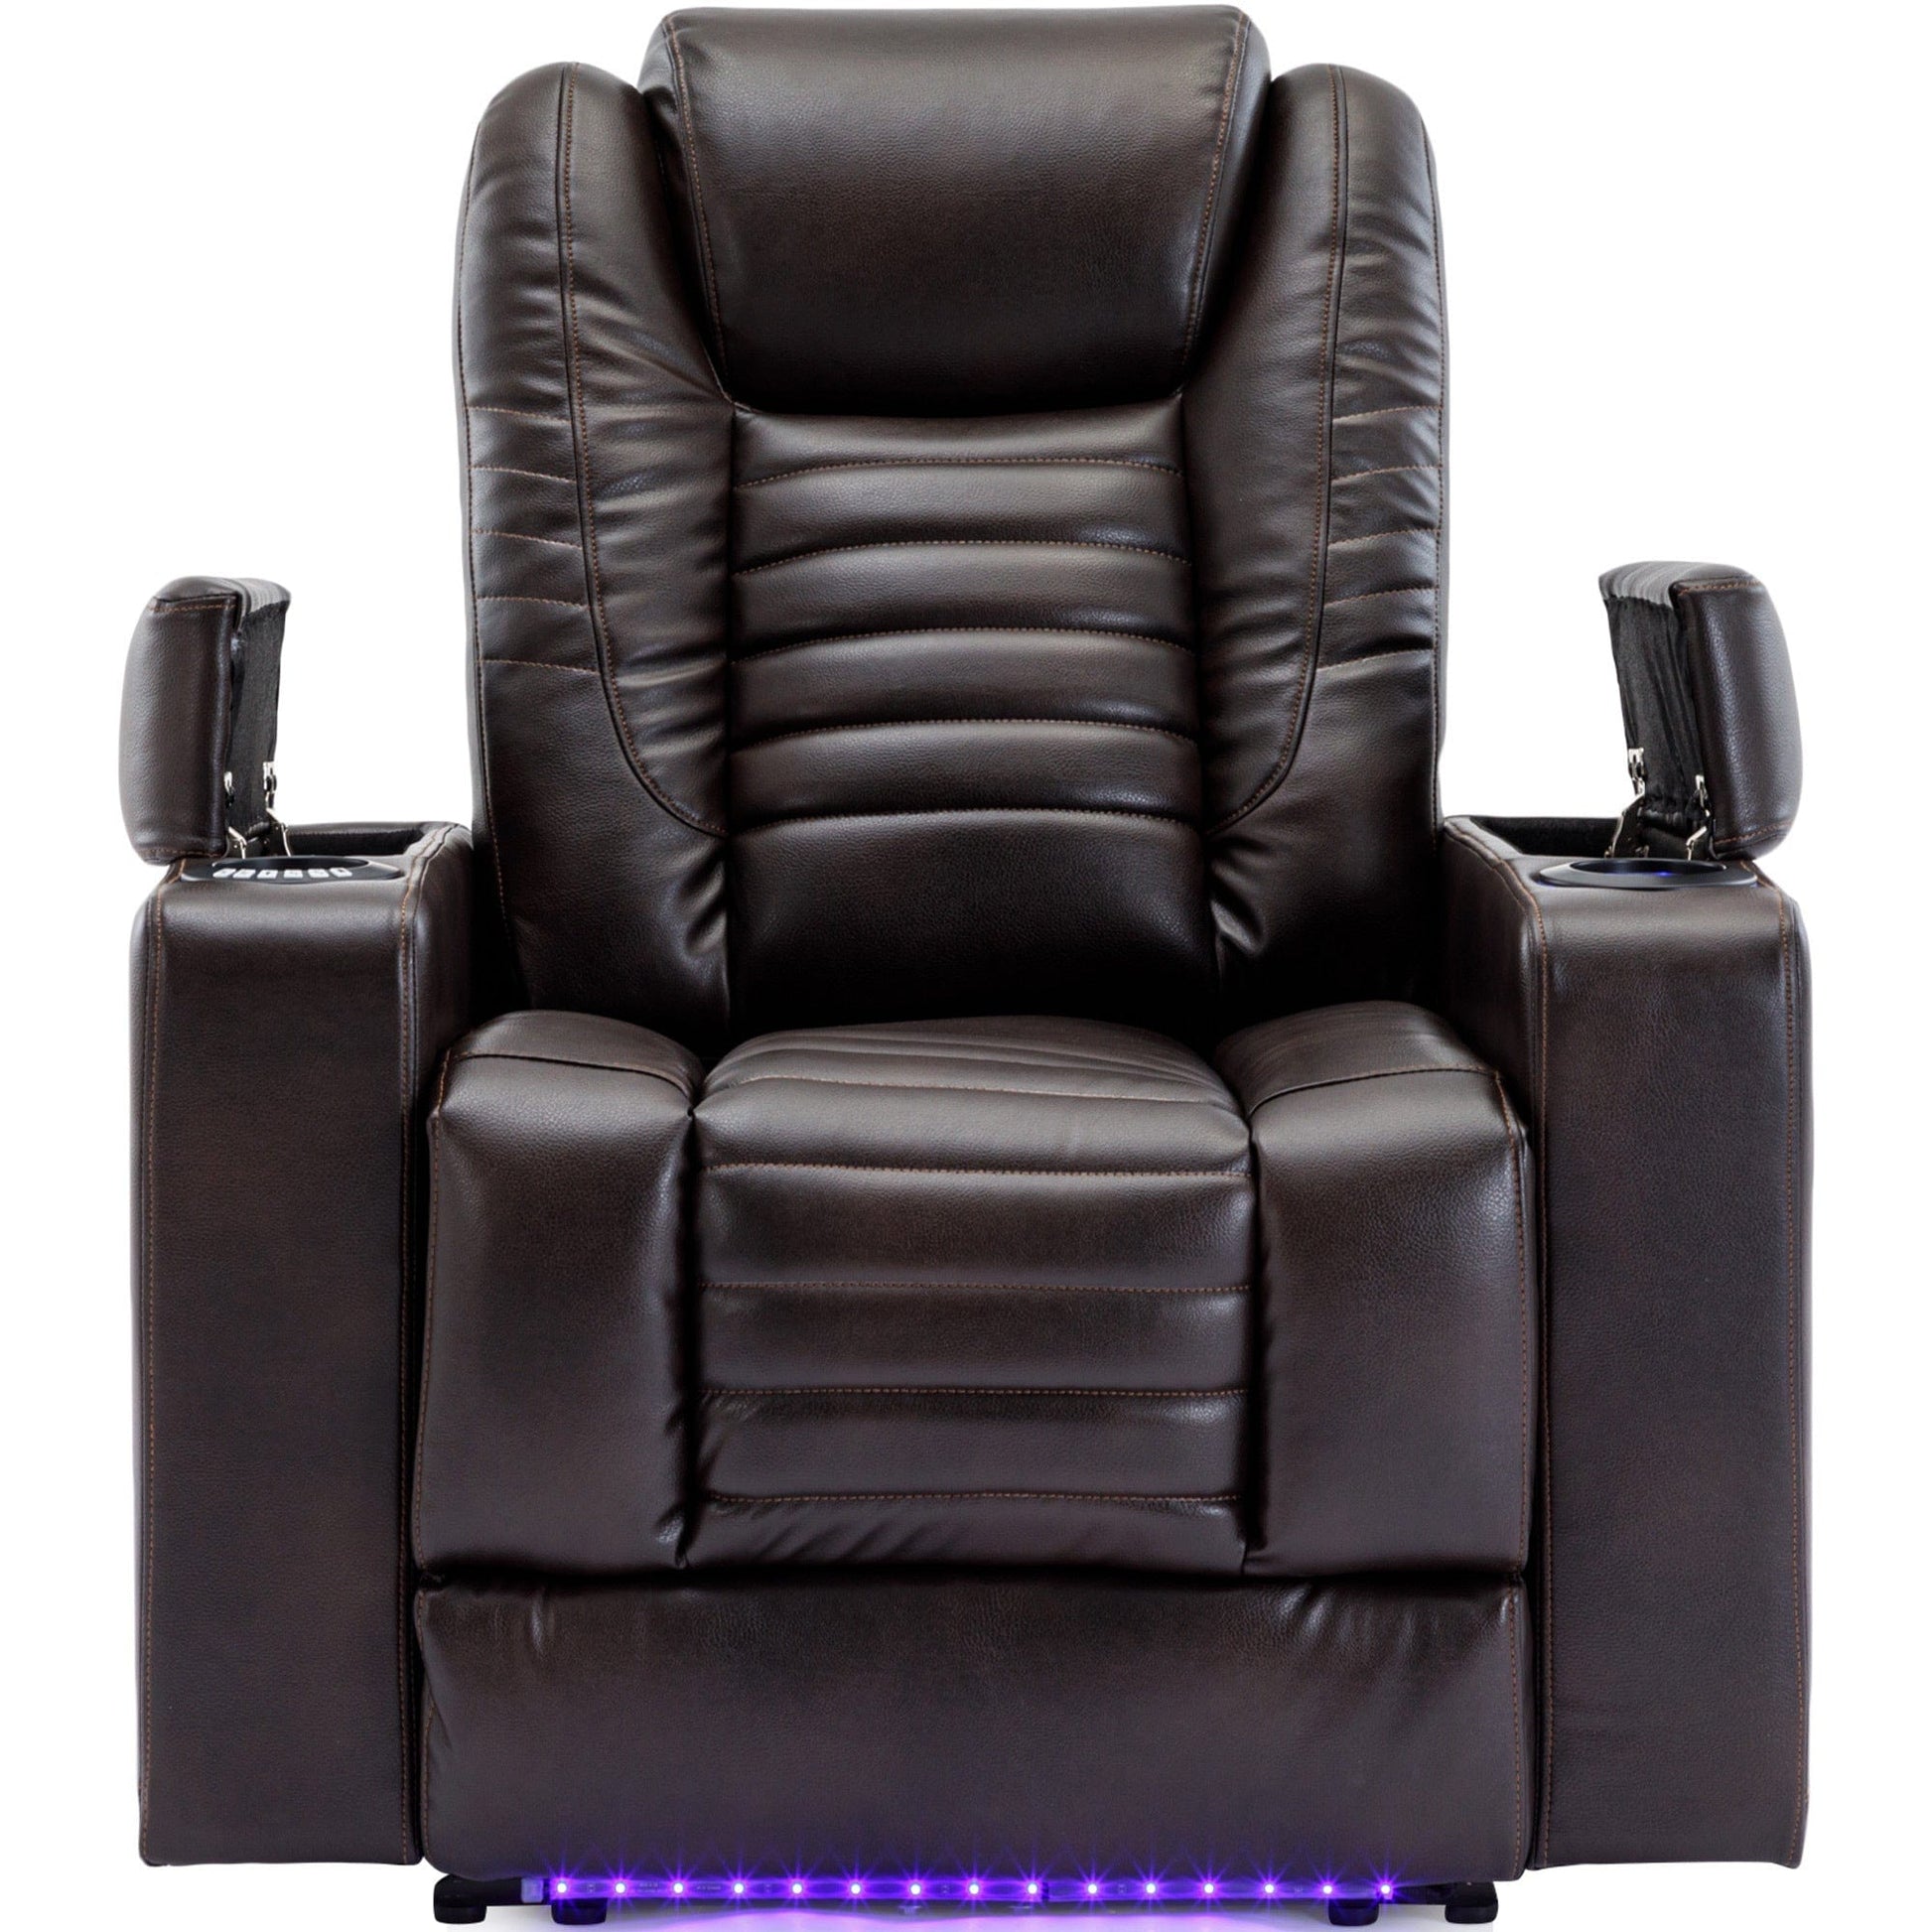 1st Choice Furniture Direct Power Motion Recliner 1st Choice Modern Power Motion Adjustable Recliner in Brown Finish